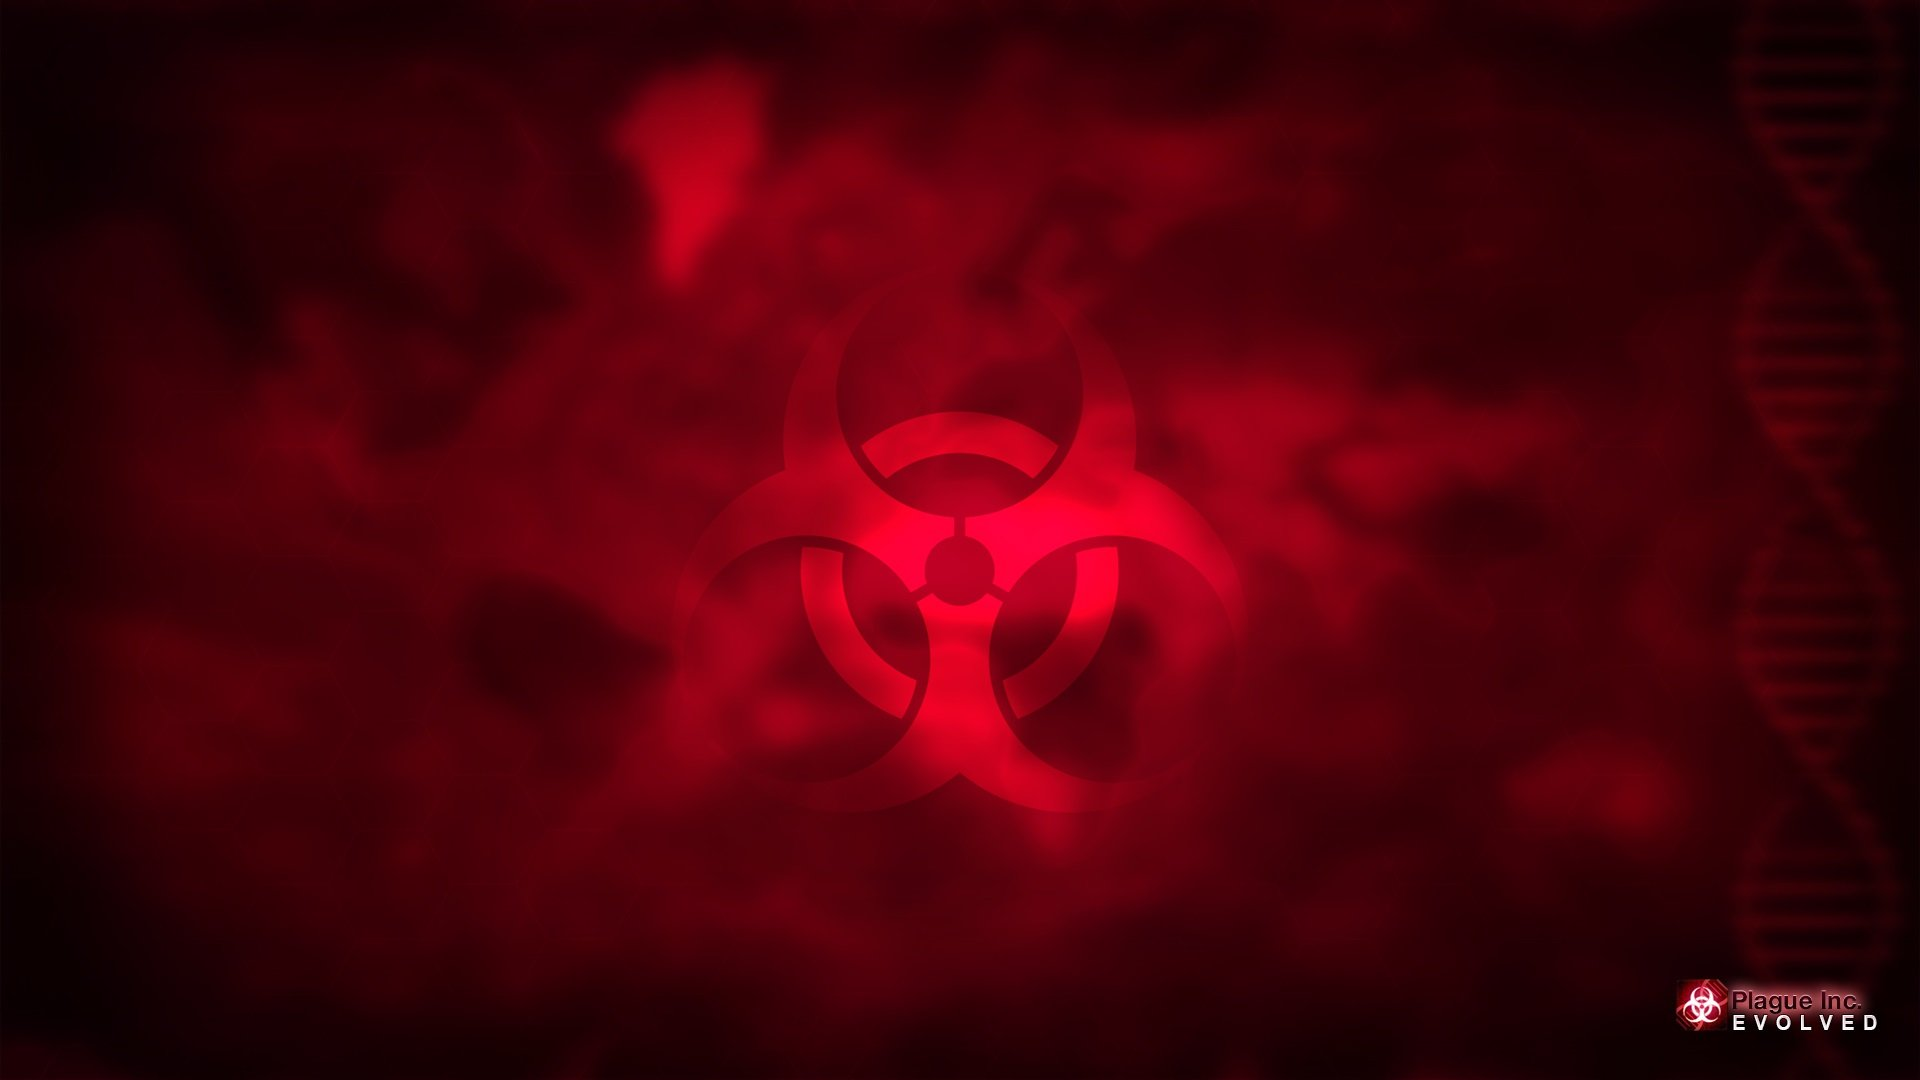 Plague Inc: Evolved Backgrounds on Wallpapers Vista